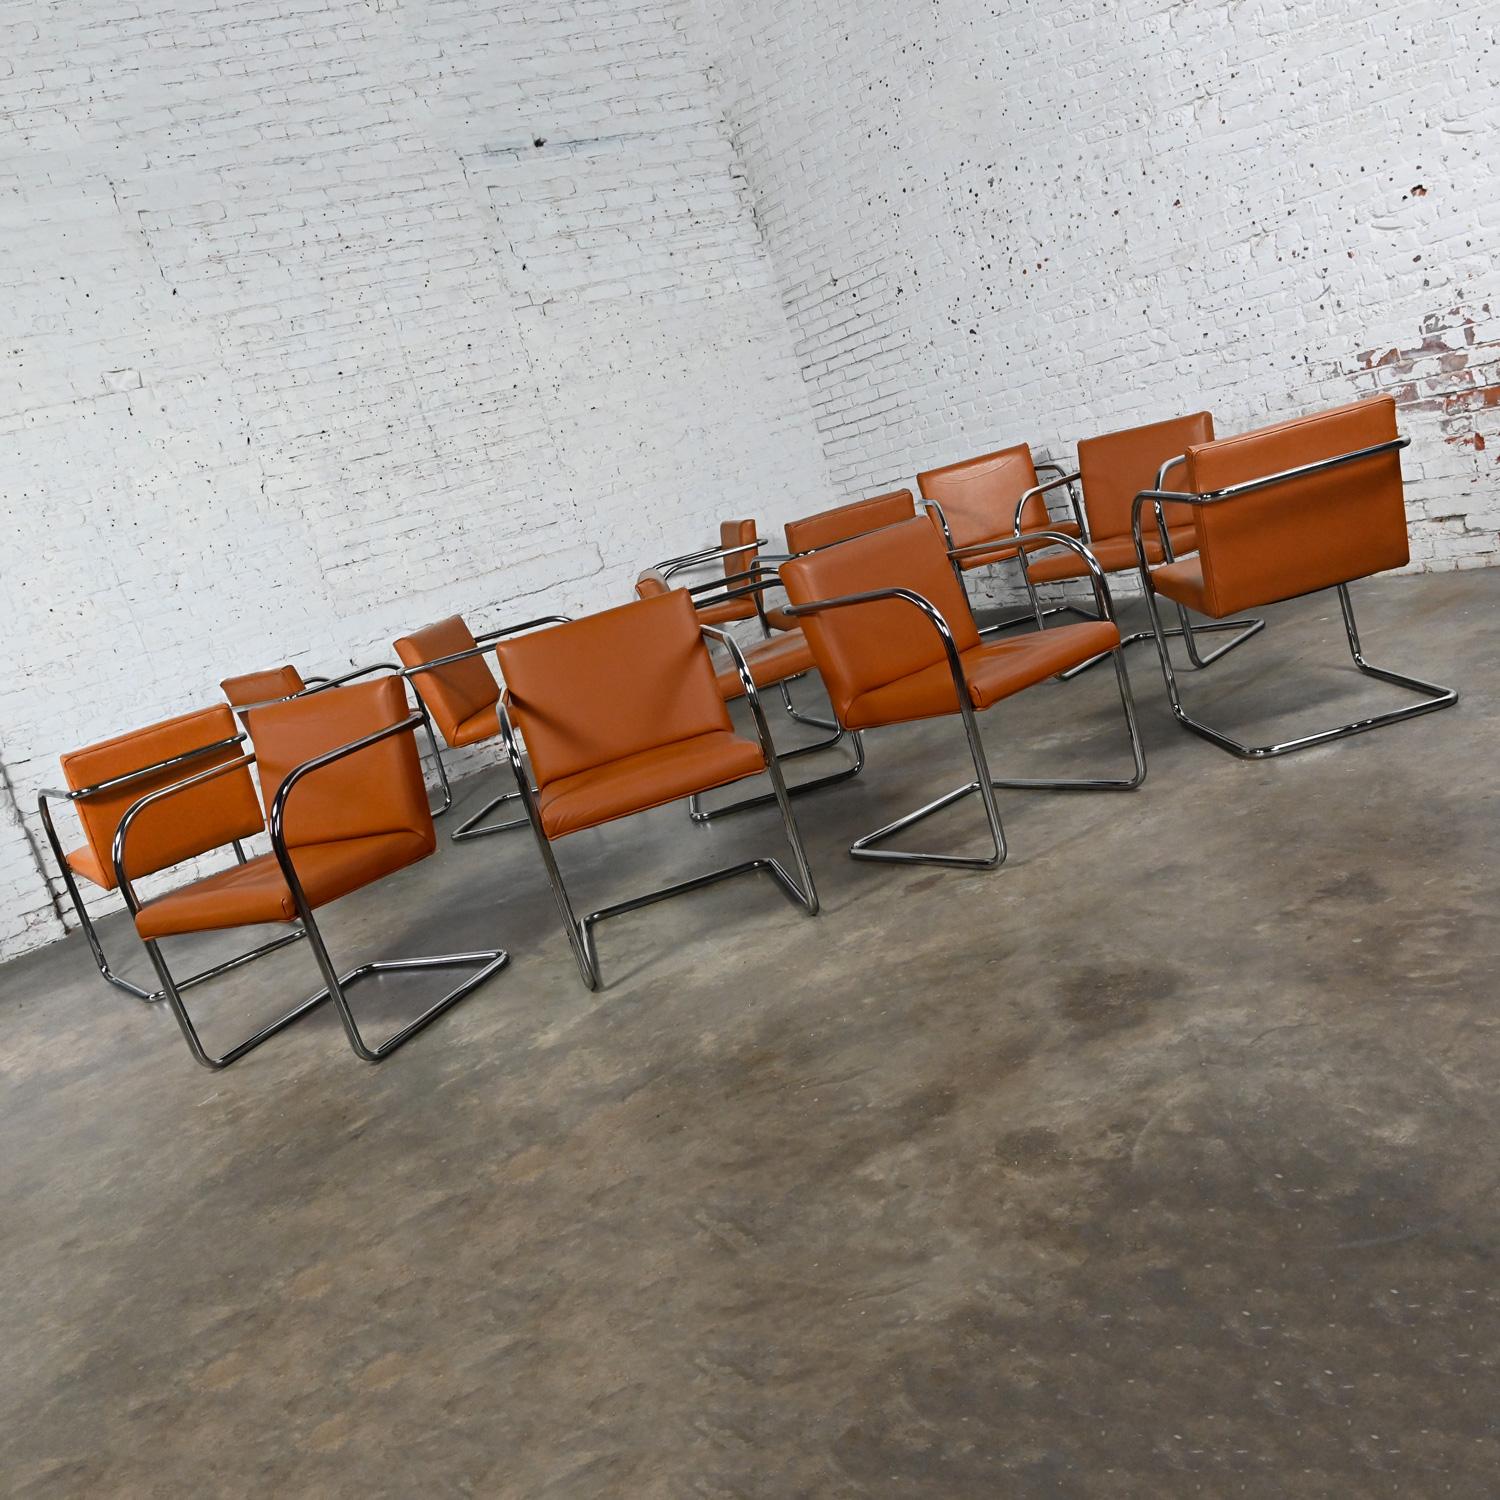 20th Century Thonet Bauhaus Brno Style Chairs Chrome & Cognac Leather Cantilever Set of 12  For Sale